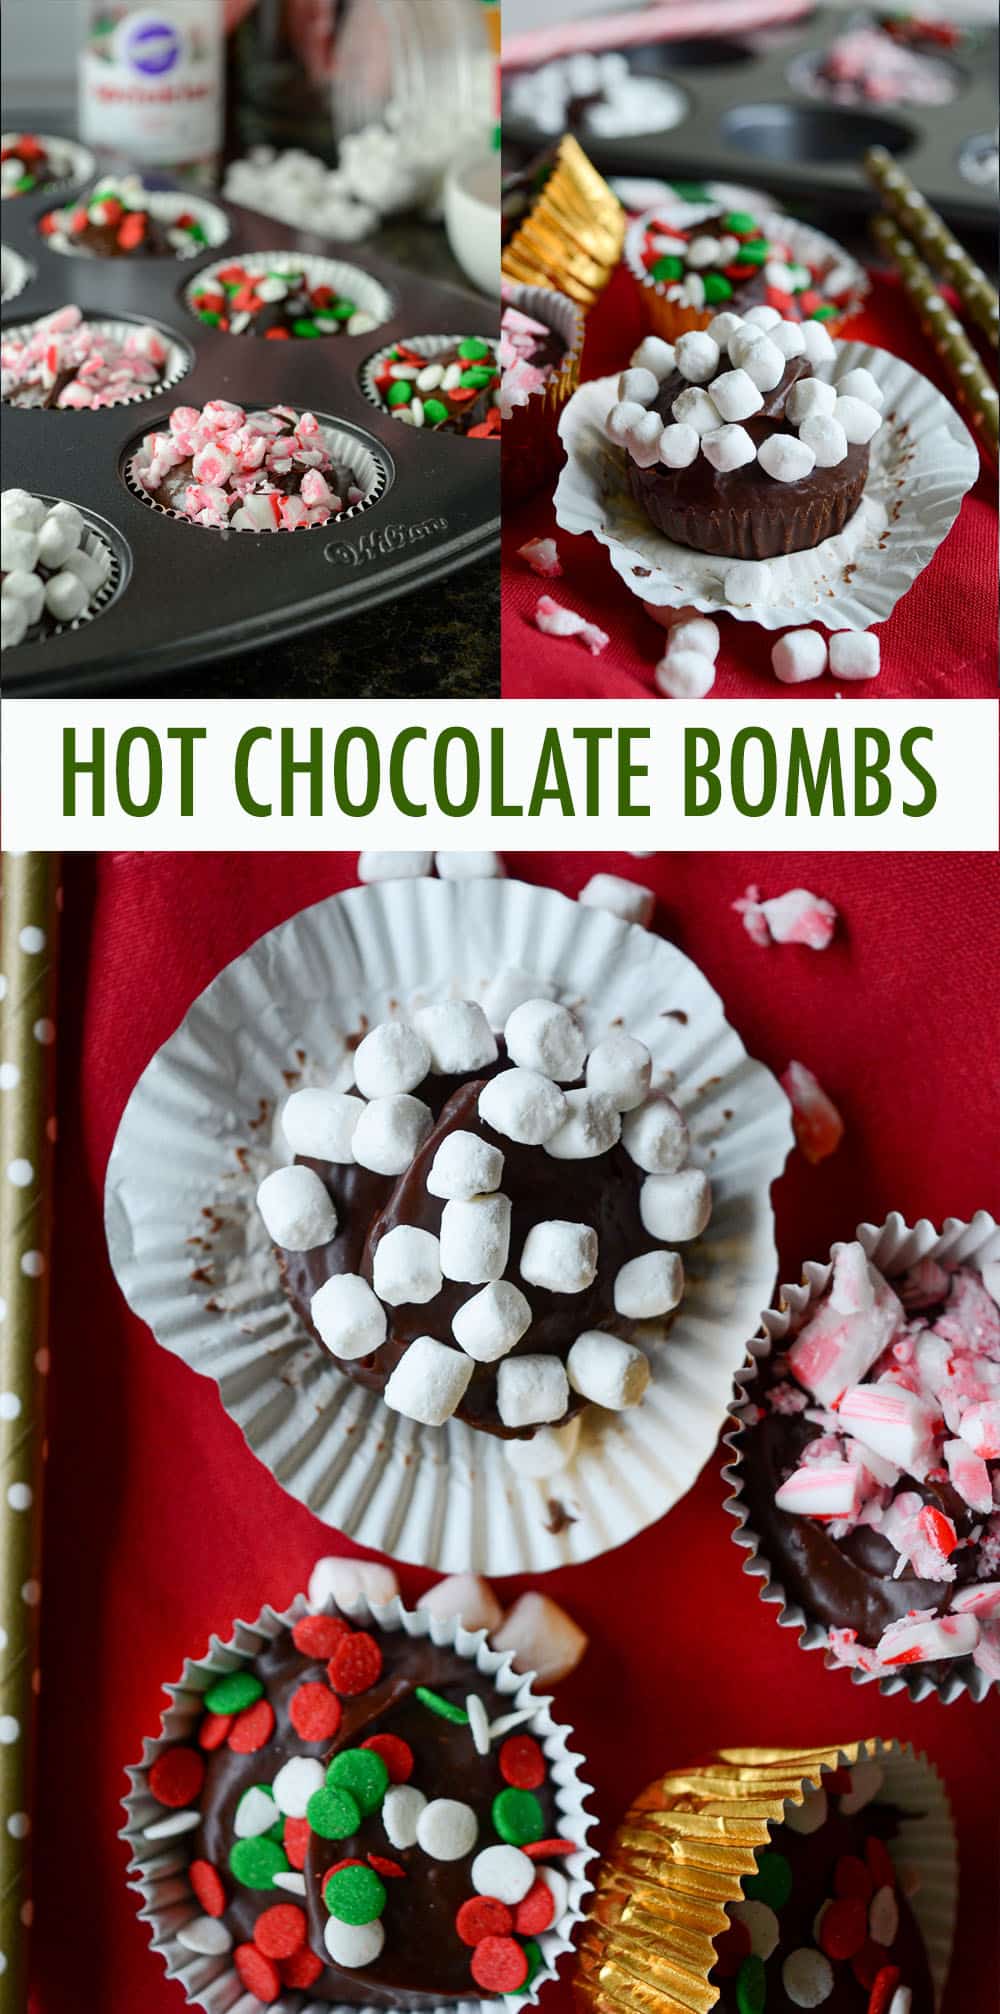 Toss these hot chocolate bombs into a mug of warm milk and you instantly have smooth, creamy, homemade hot chocolate! Add your favorite candies or sprinkles on top to make your hot chocolate even better! via @frshaprilflours